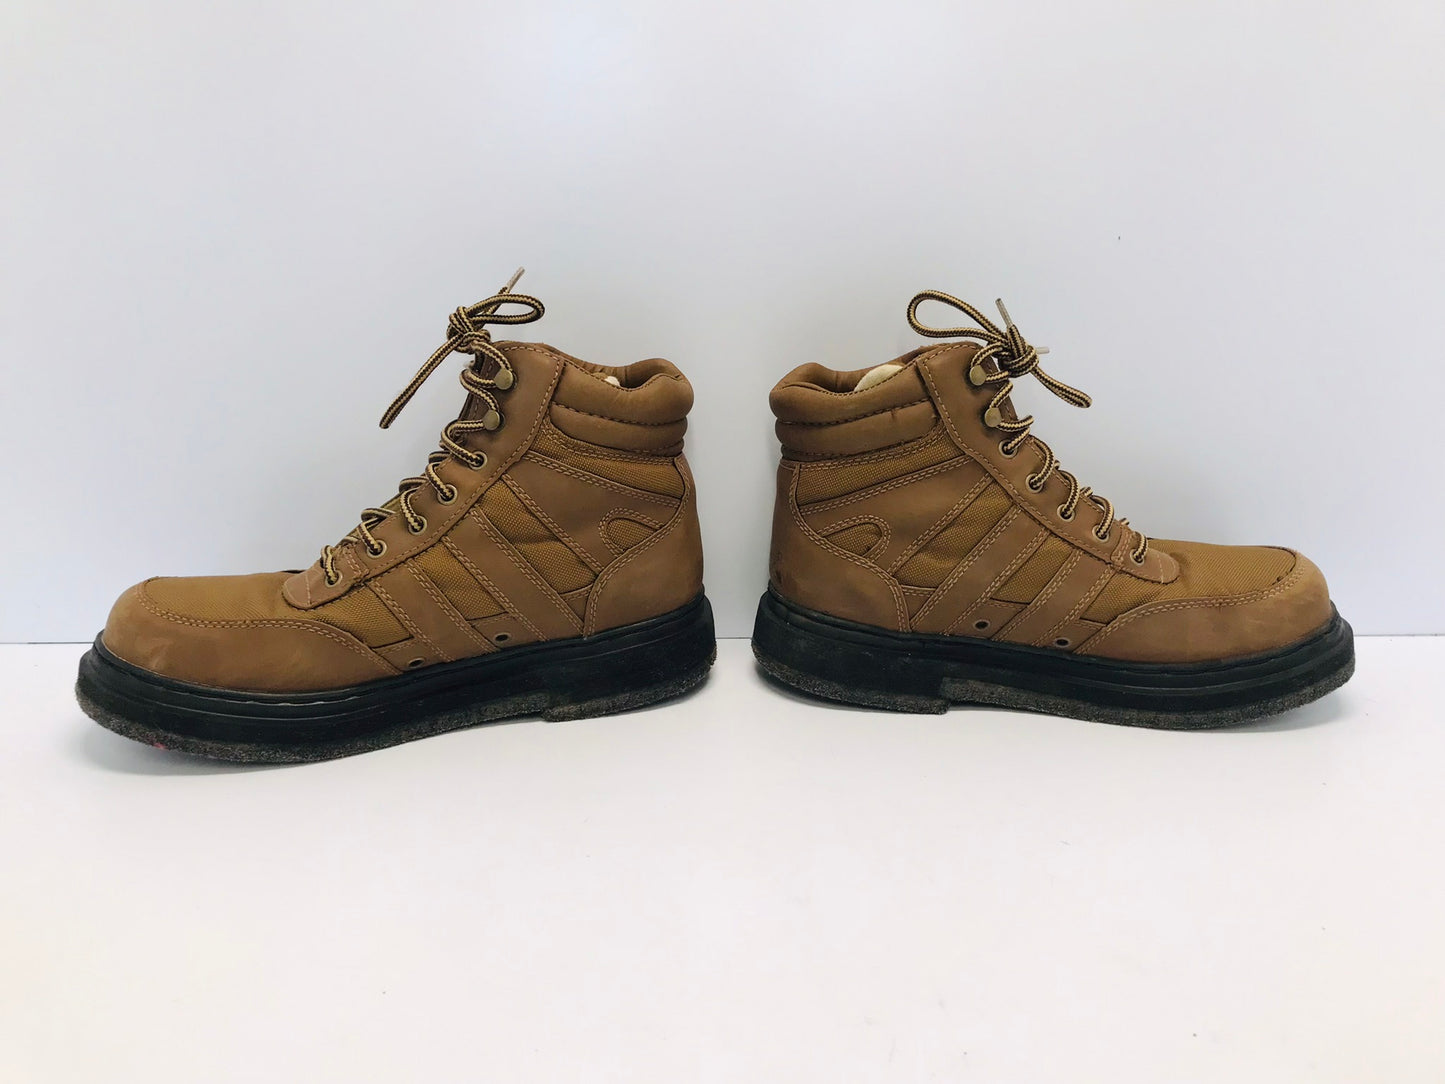 Fishing Adventures Chota Boots Men's Size 10 Wading Fly Fishing Boots with Felt Sole Excellent